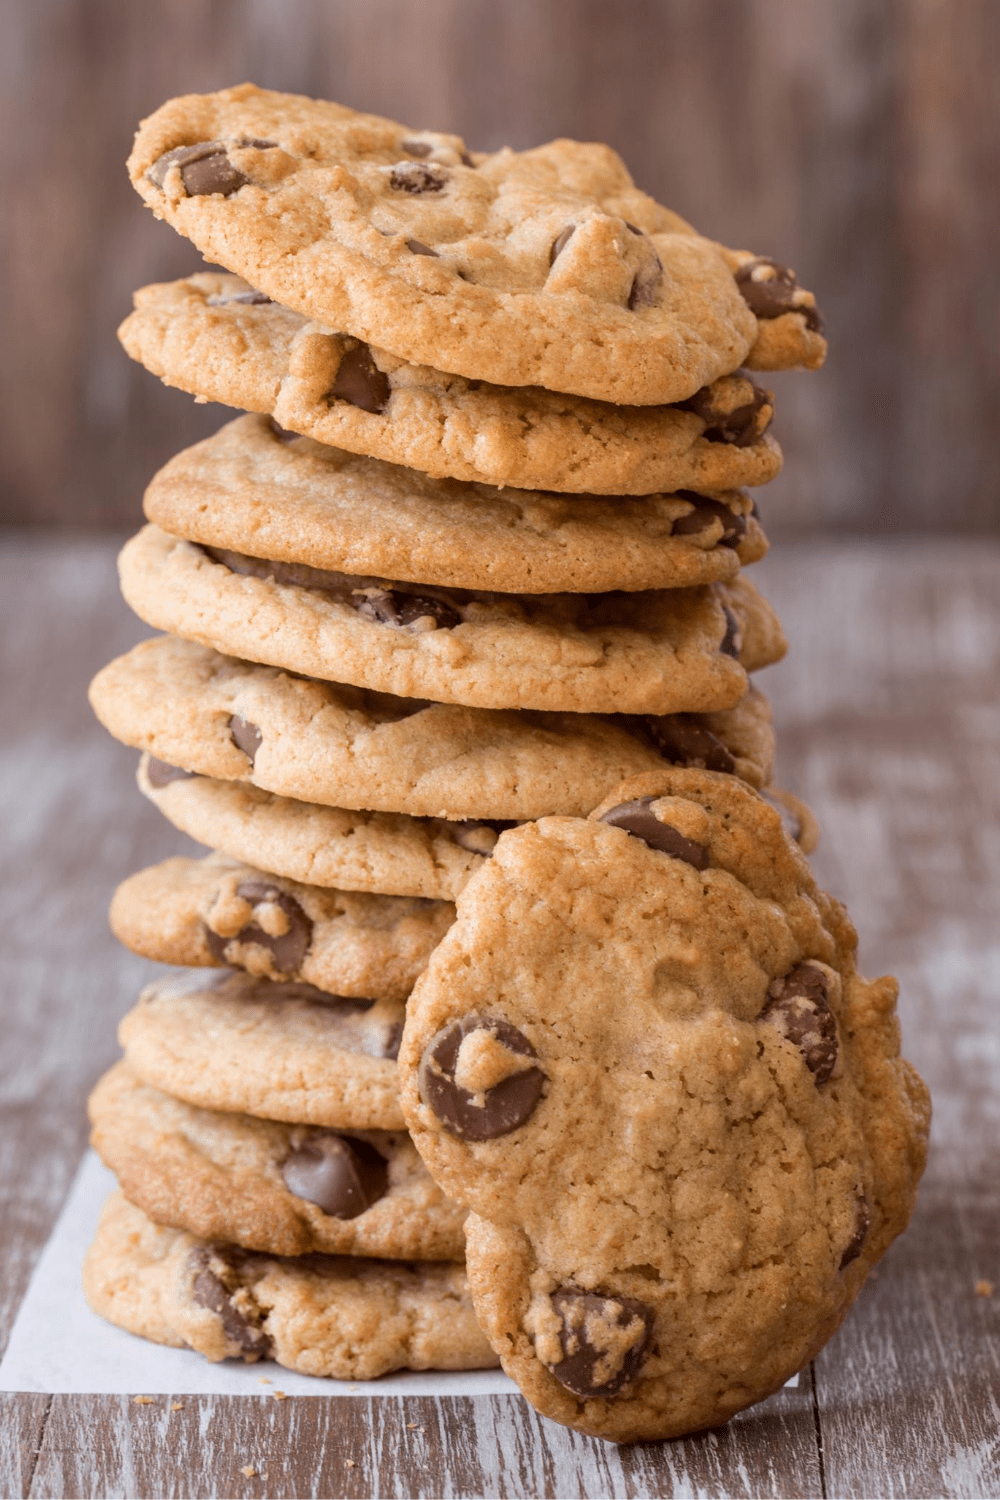 Stacks of Chocolate Chip Cookies